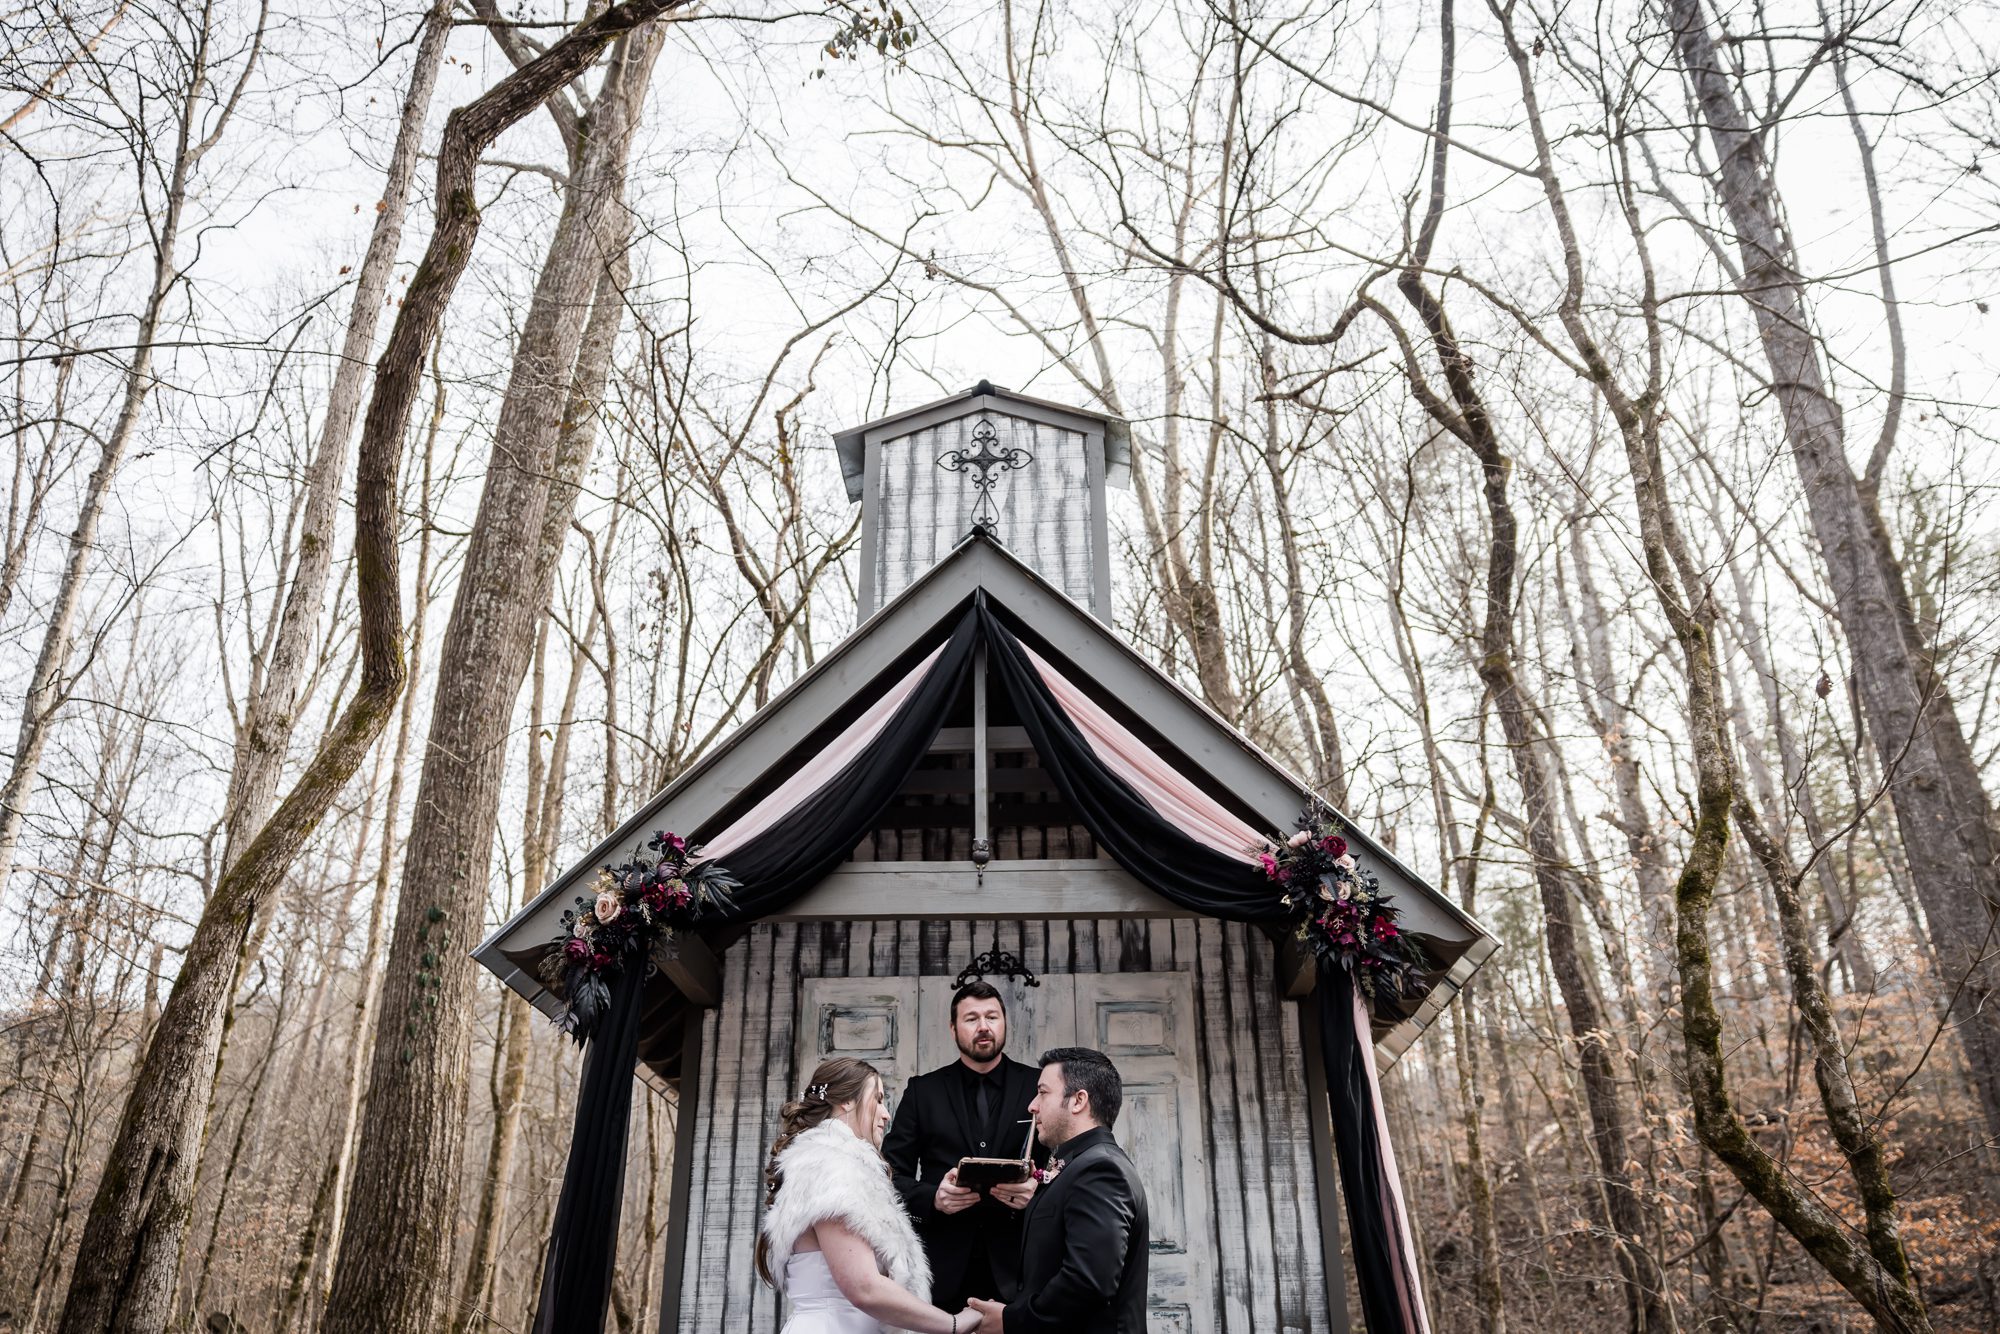 Lord of the Rings Inspired Micro Wedding